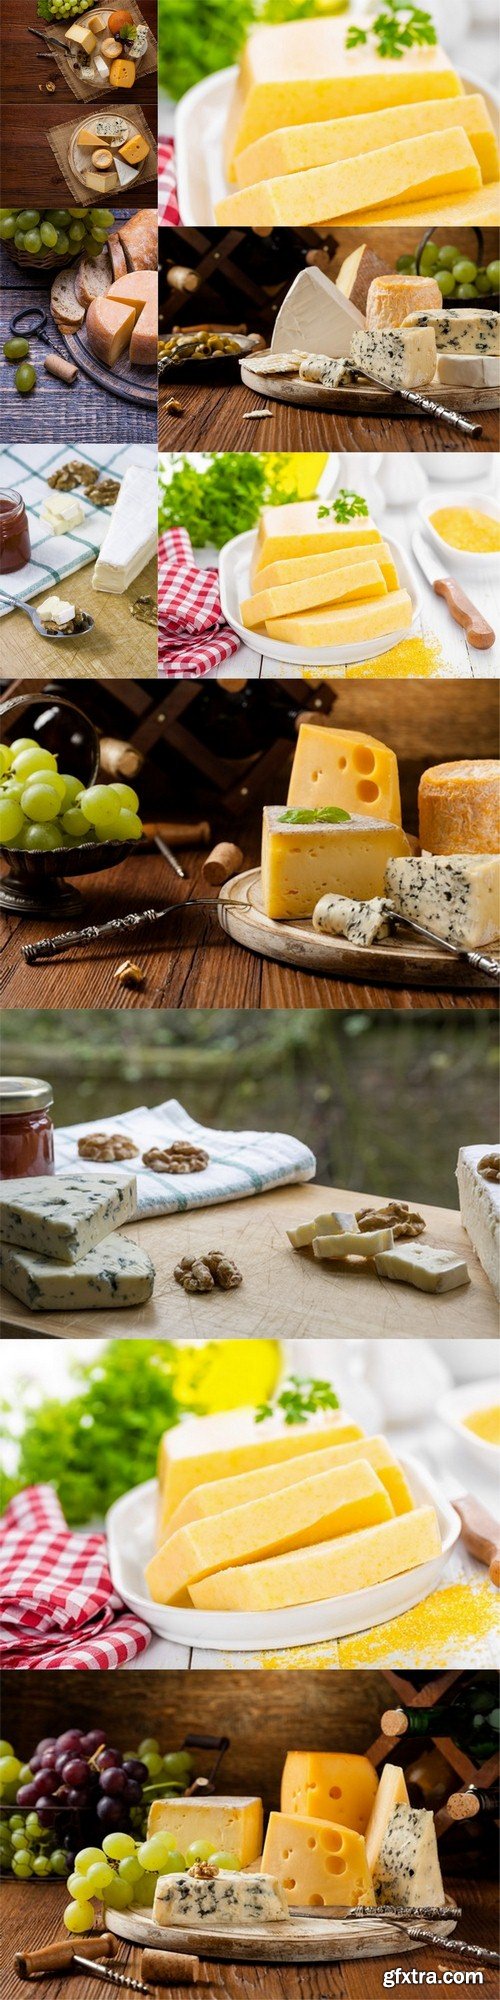 Cheese on the table - 11 UHQ JPEG Stock Images